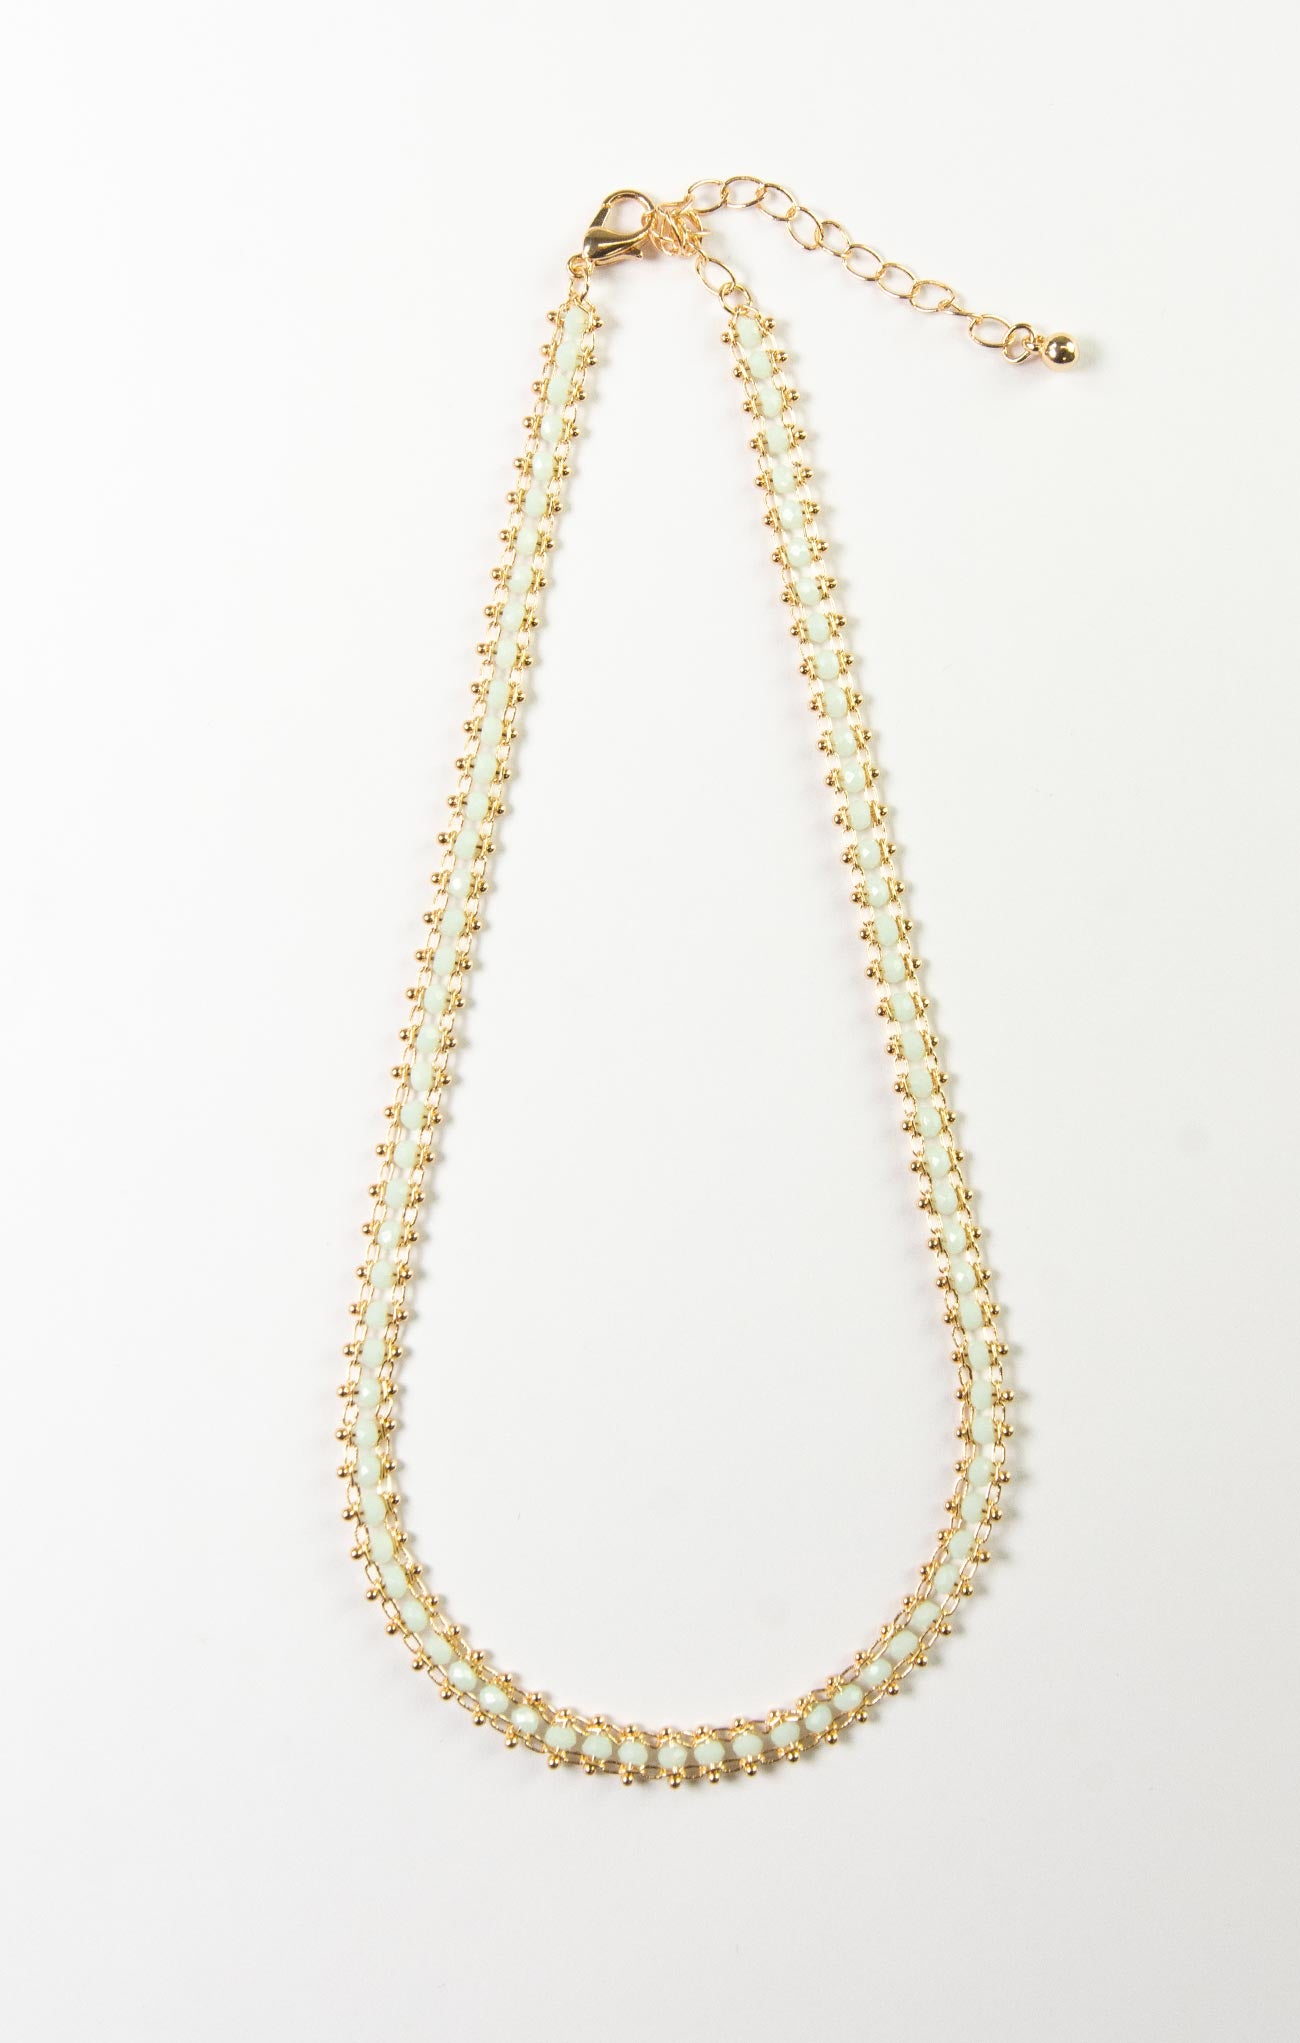 GLASS BEAD CHAIN CHOKER-white,grey gold,gold chain,clasp closure,double beaded